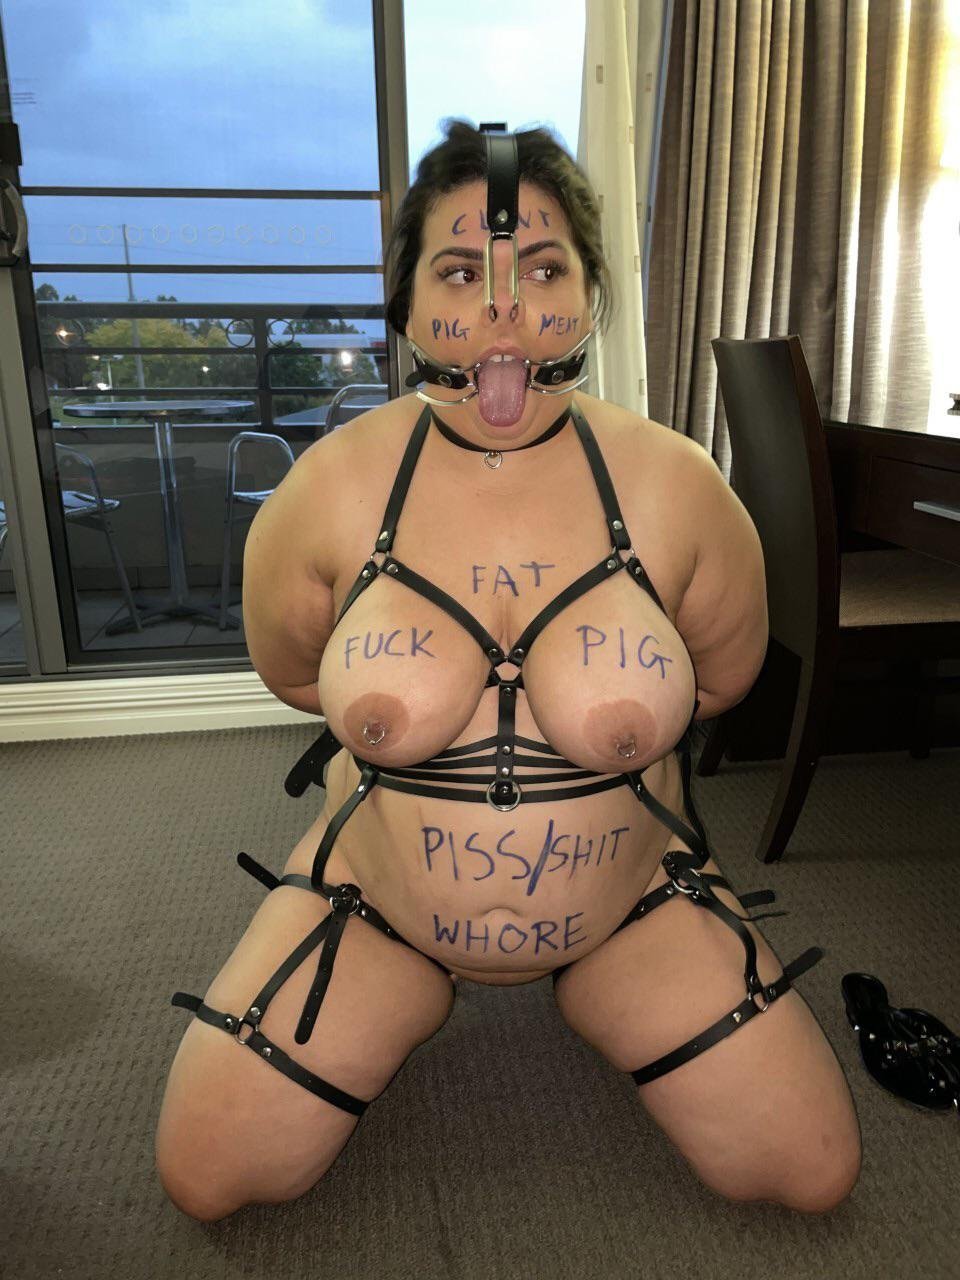 Perfect humiliation Pig - Porn Videos and Photos